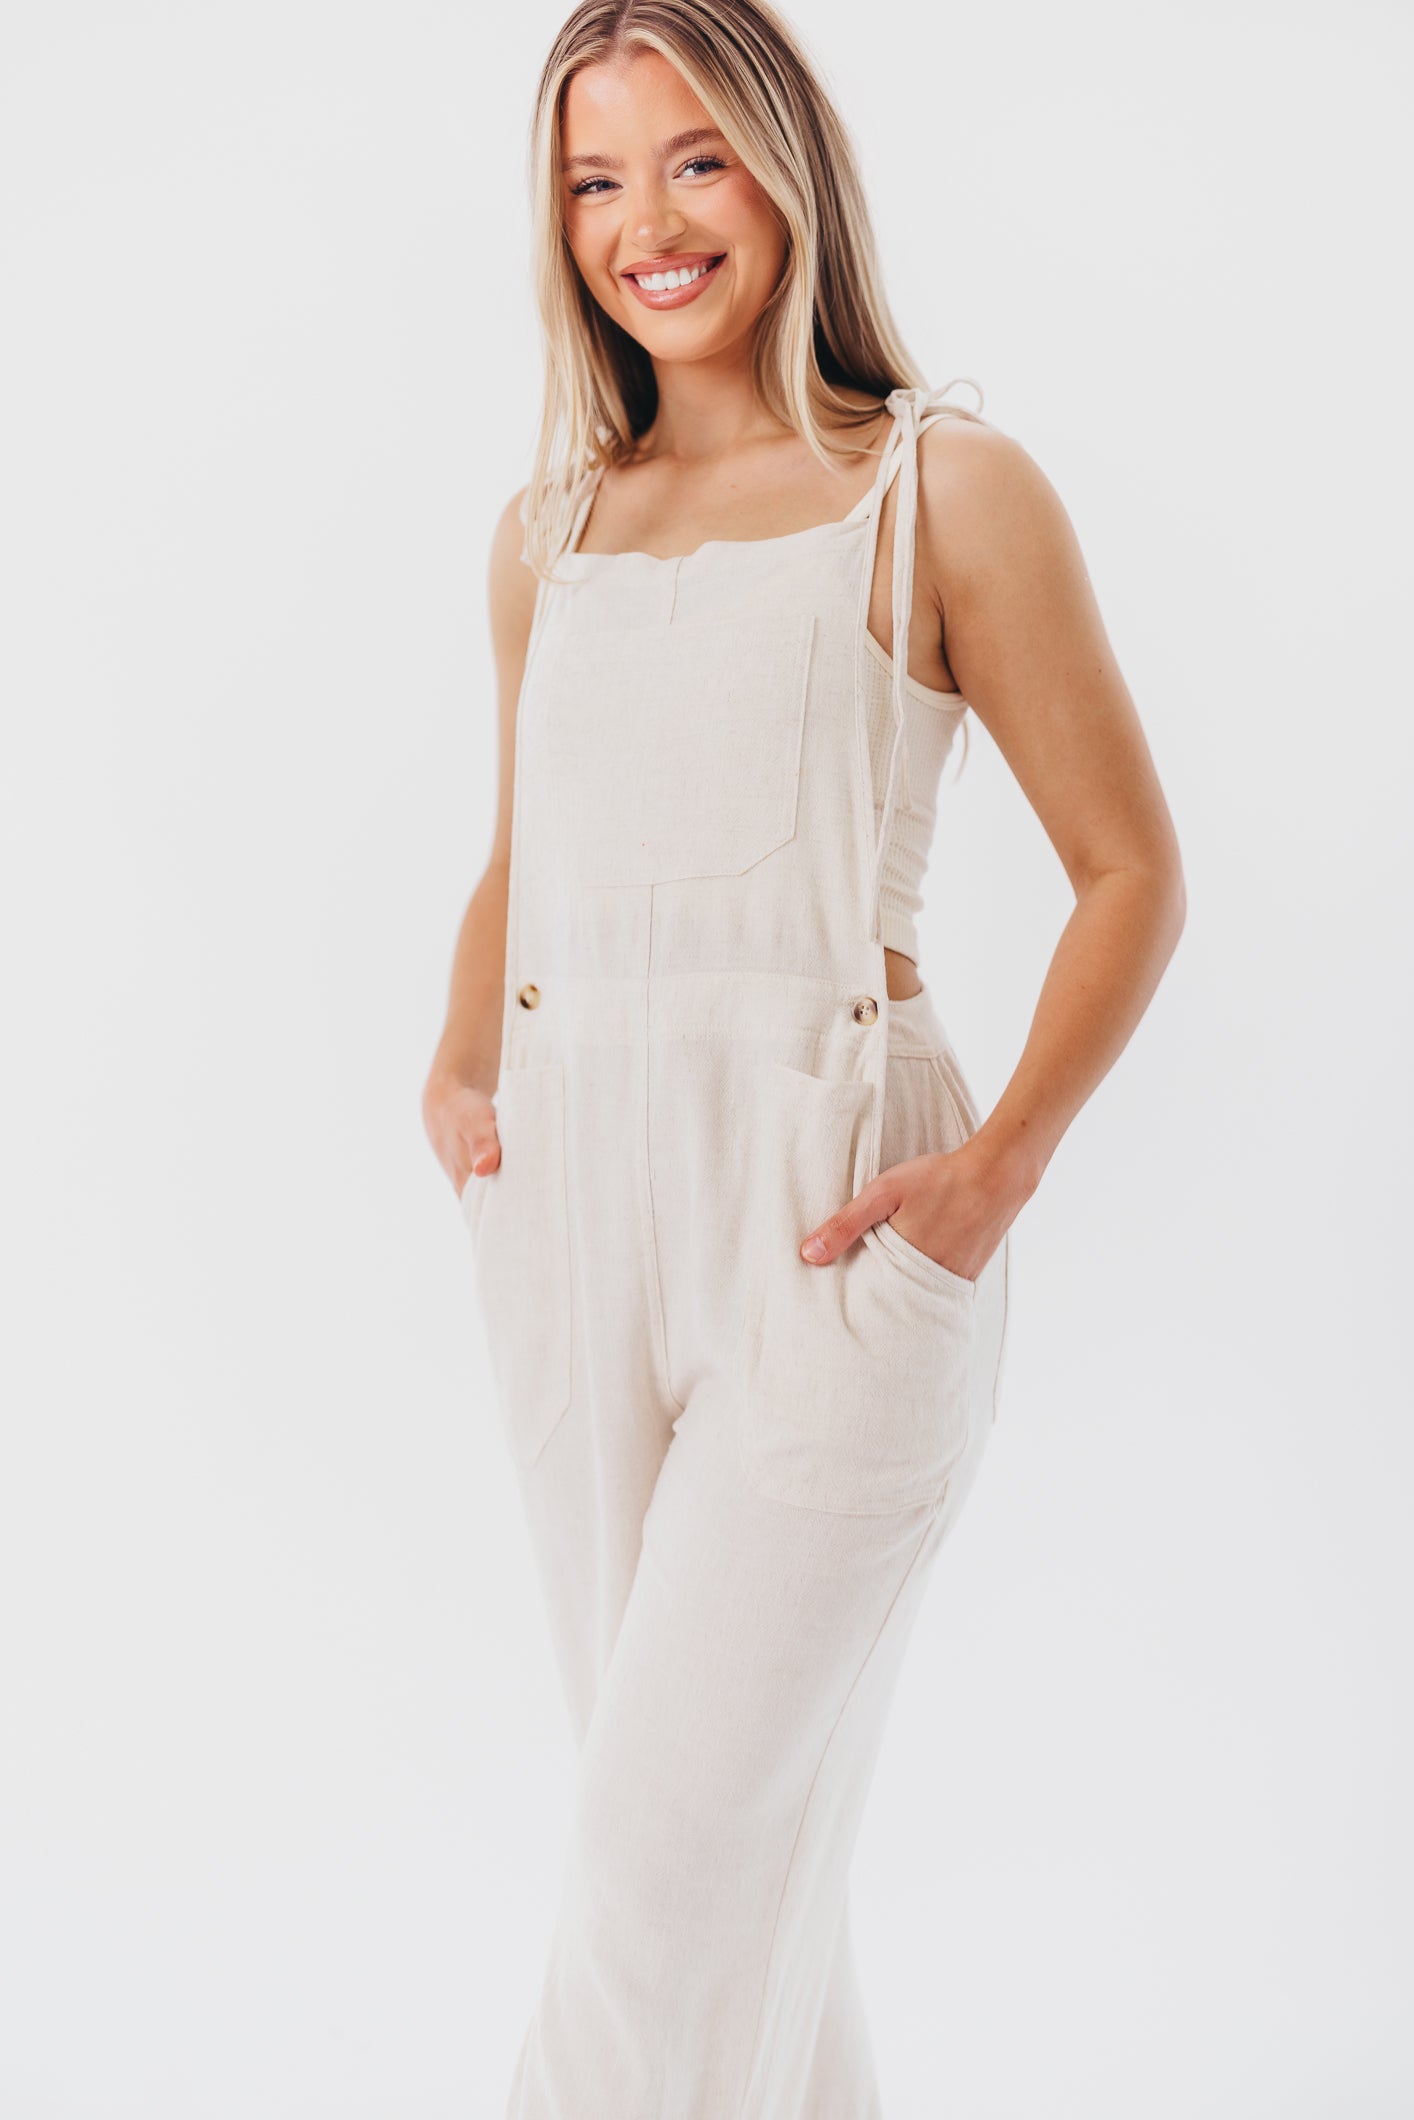 Presley Linen-Blend Overall in Natural